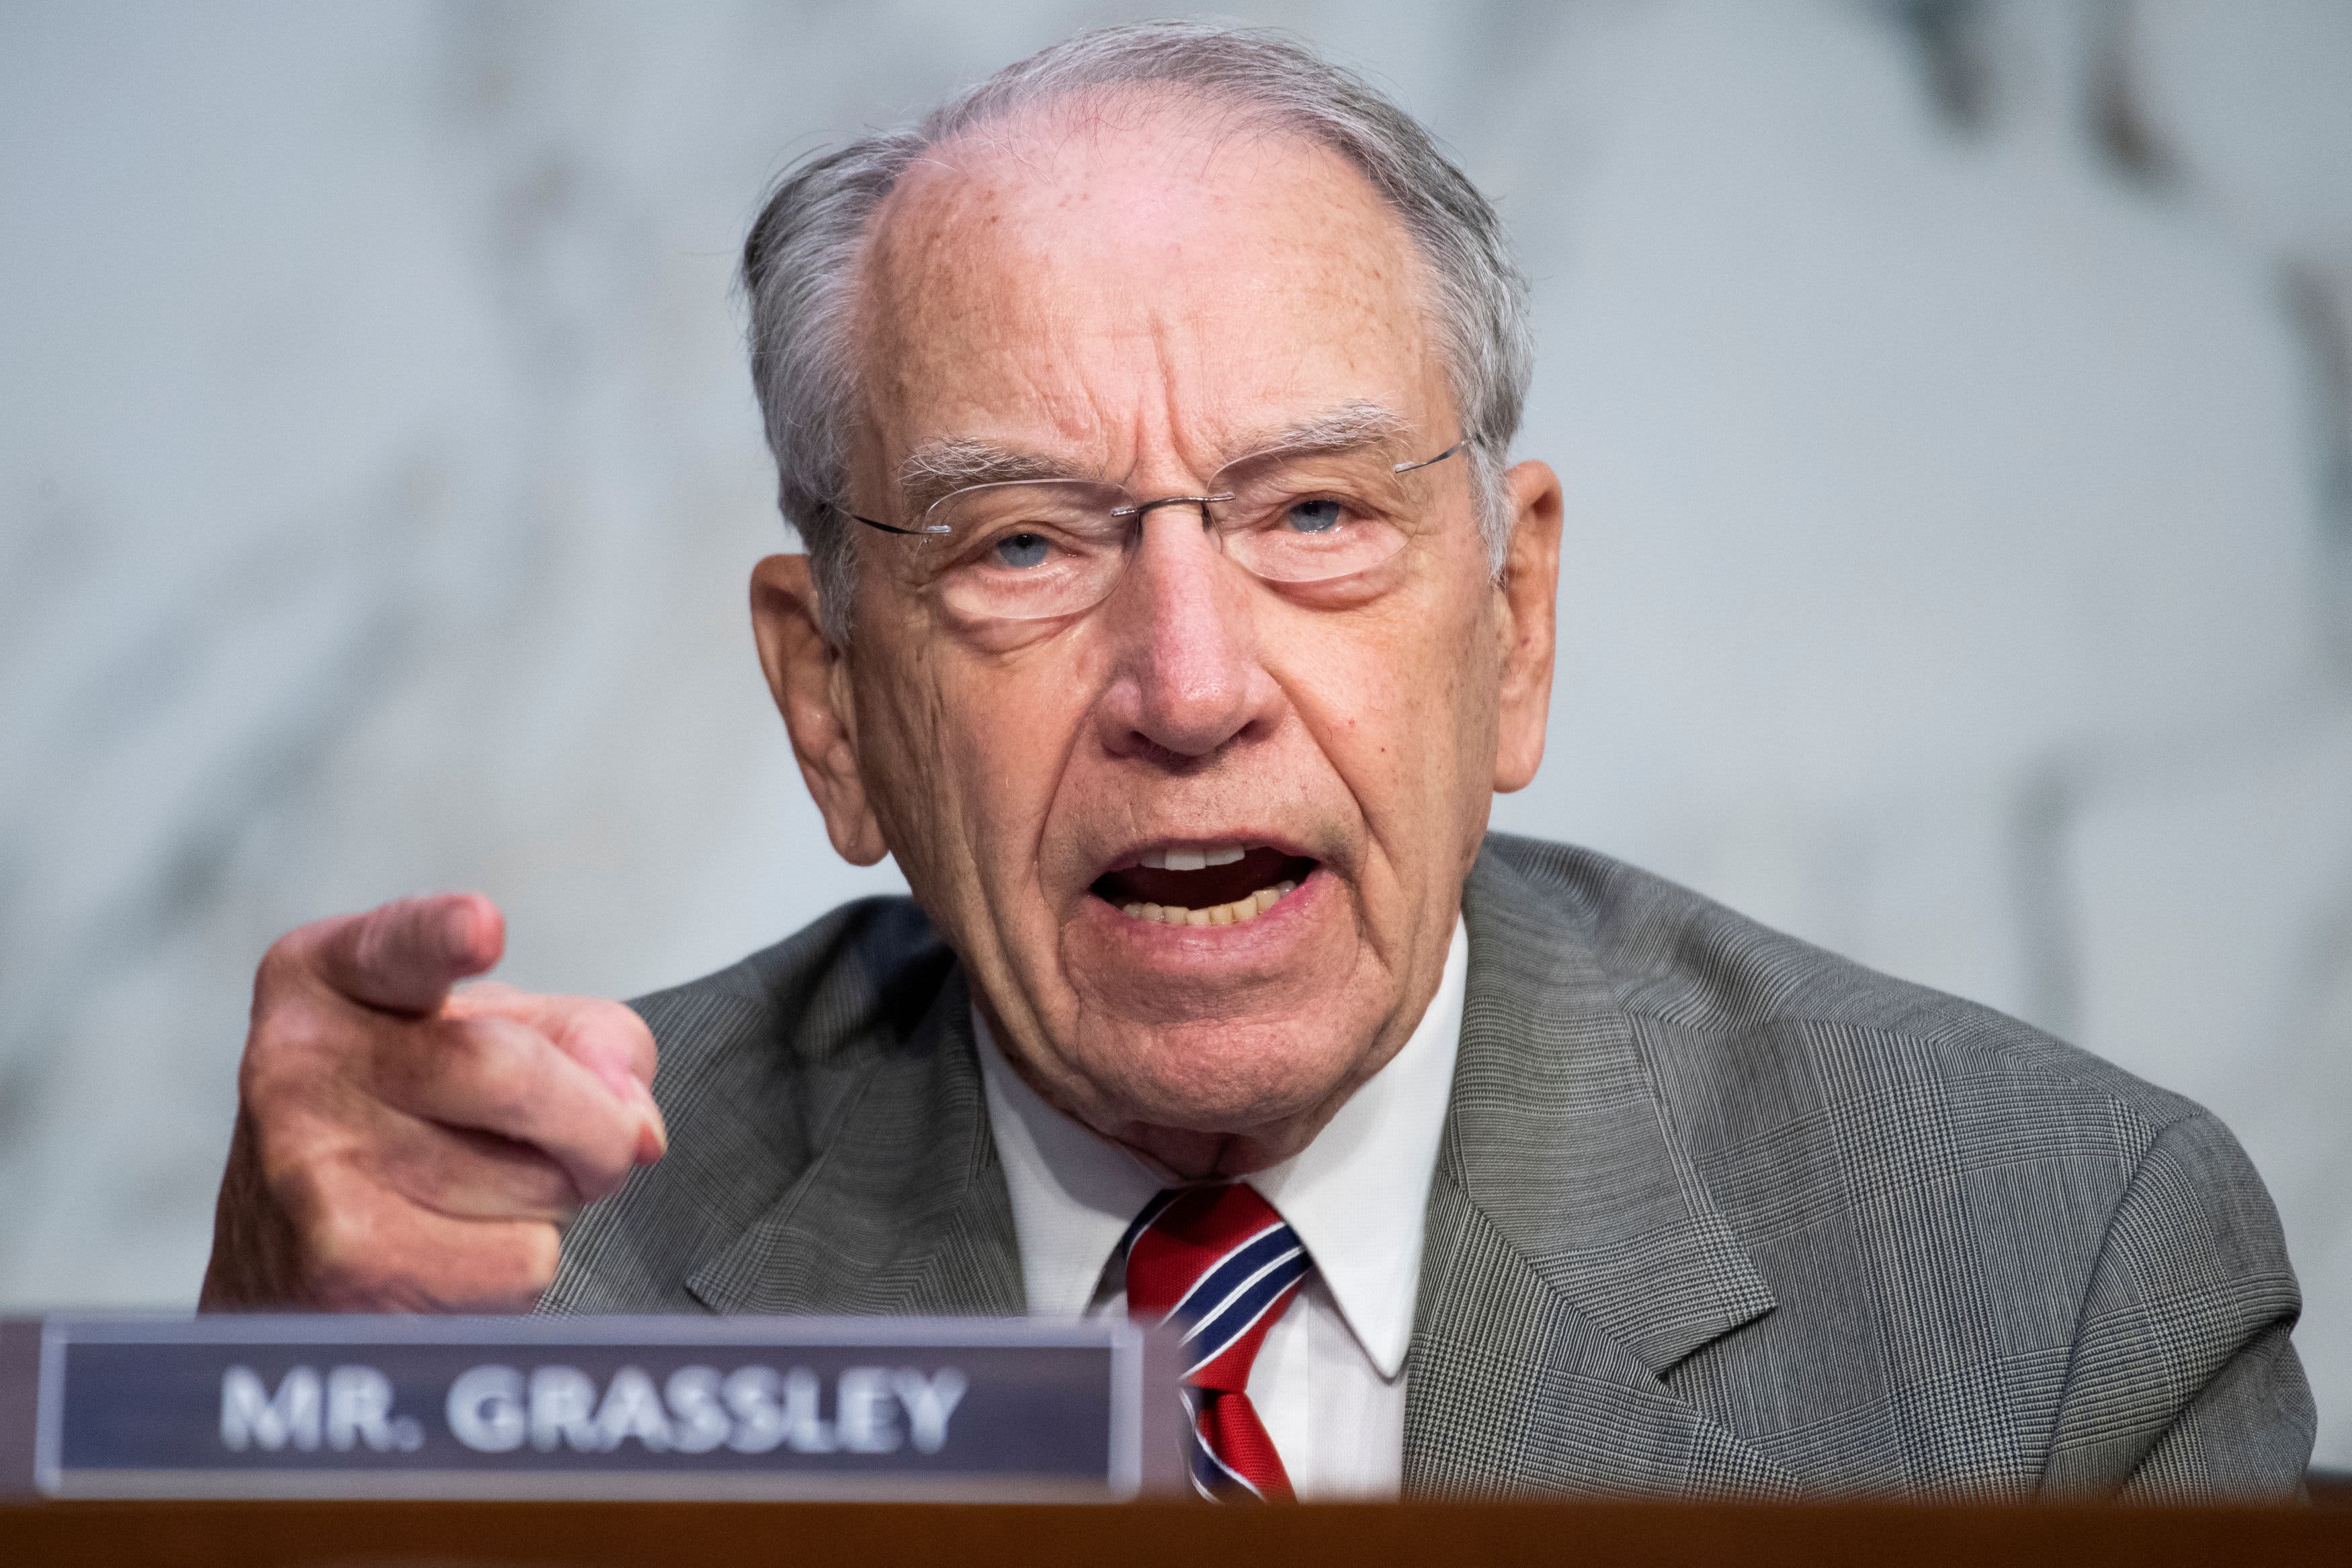 Election: Grassley says Trump should give Biden classified briefings